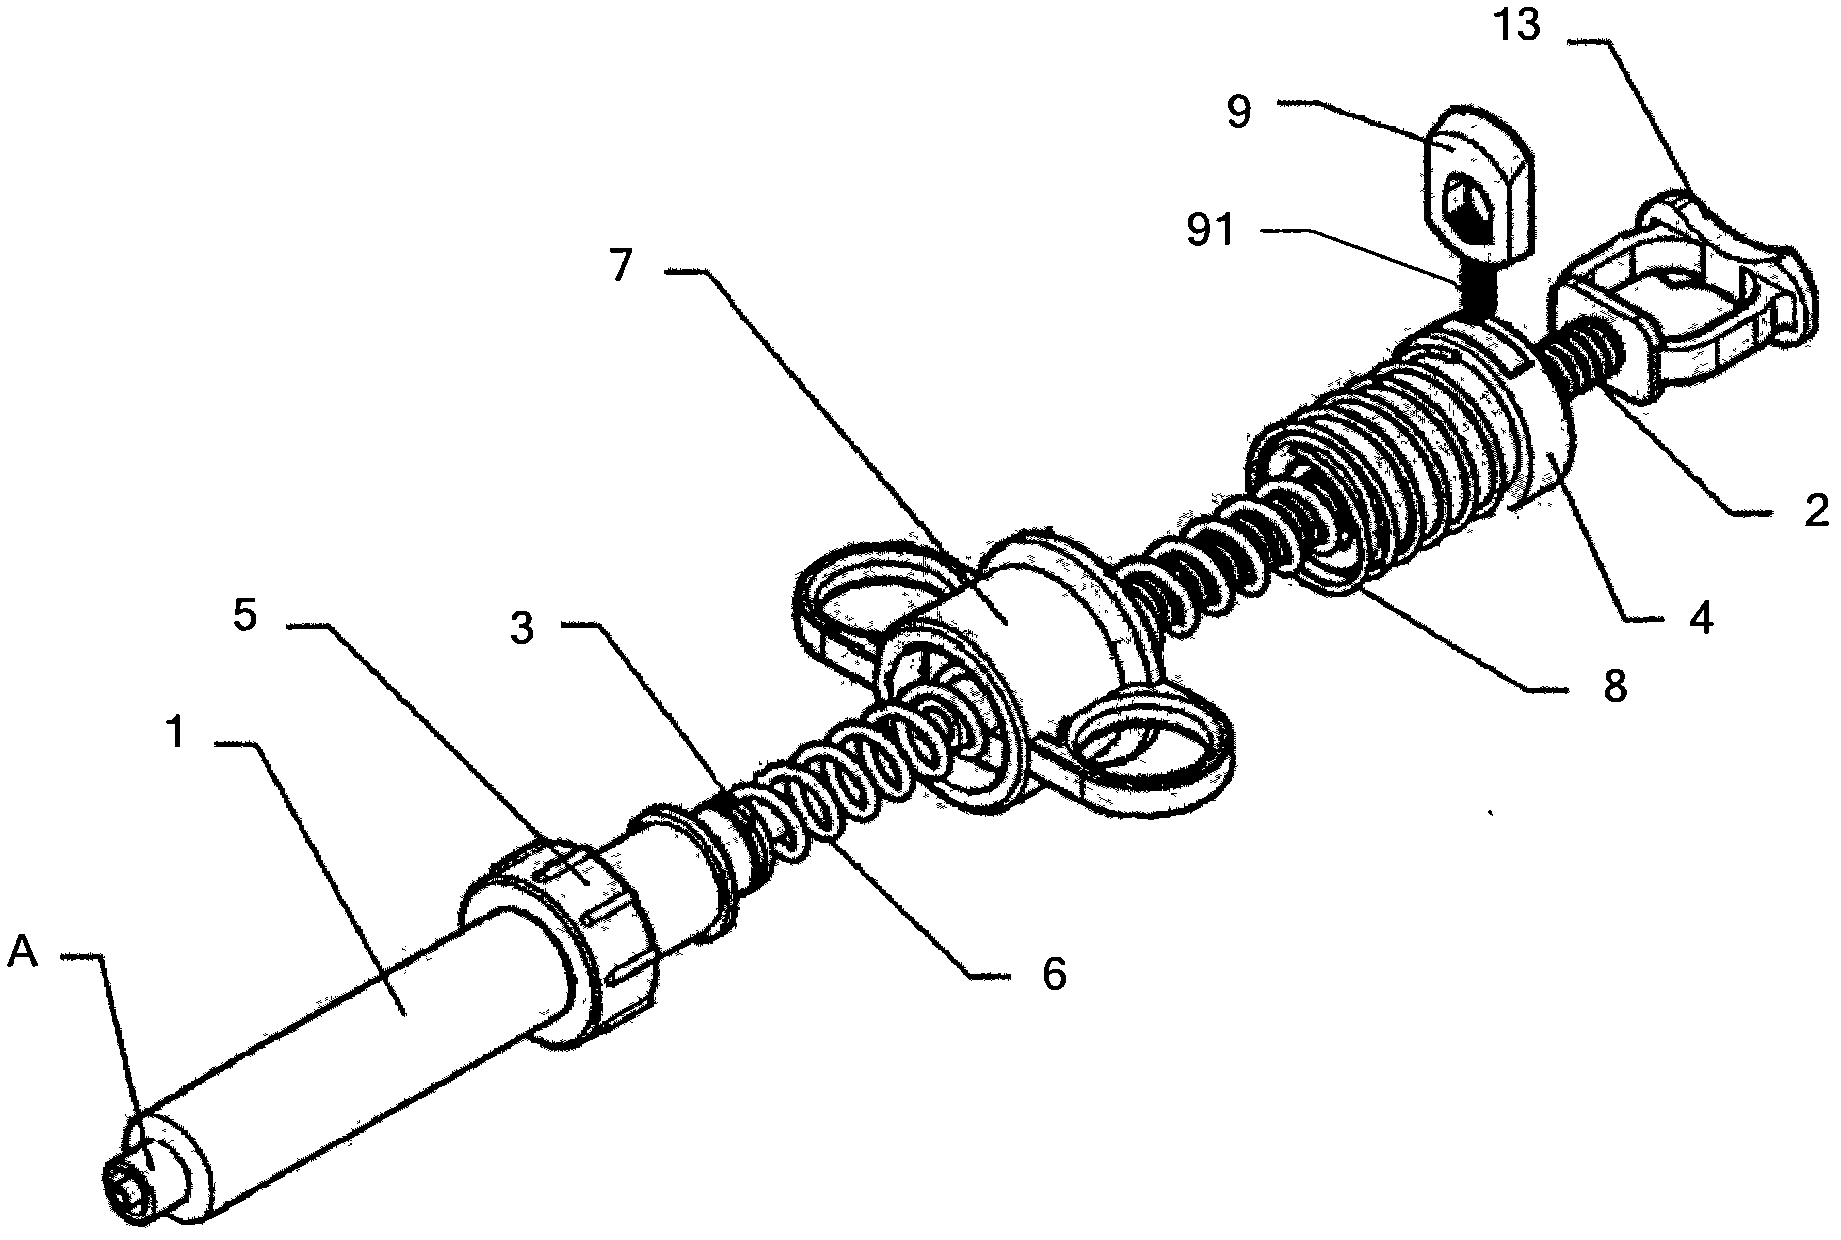 Power-assisted three-ring injection syringe